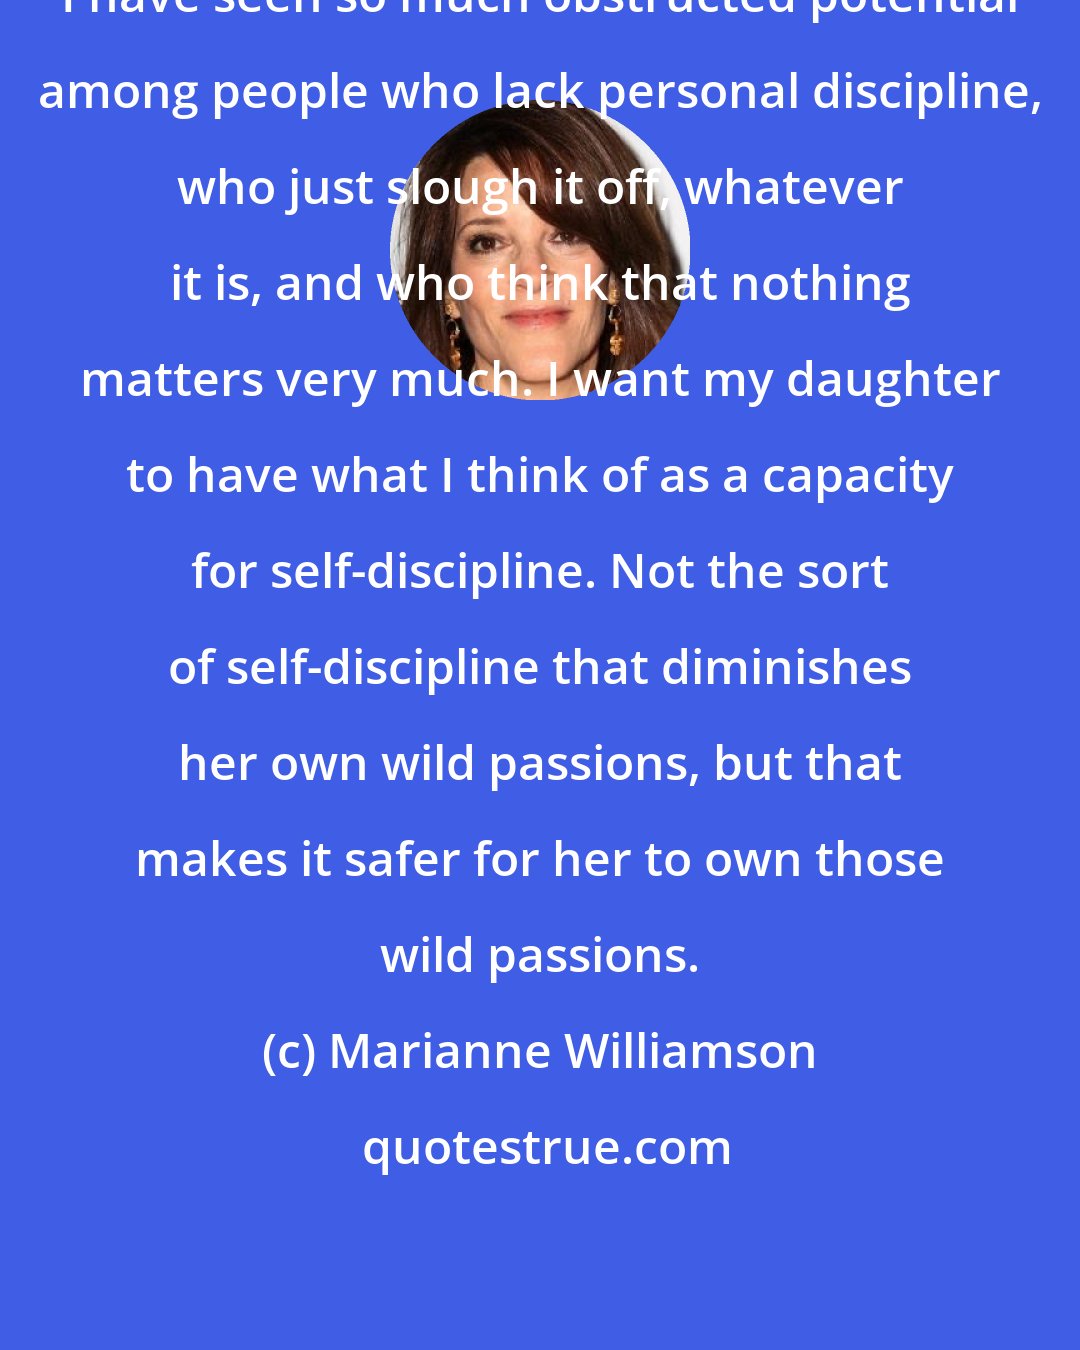 Marianne Williamson: I have seen so much obstructed potential among people who lack personal discipline, who just slough it off, whatever it is, and who think that nothing matters very much. I want my daughter to have what I think of as a capacity for self-discipline. Not the sort of self-discipline that diminishes her own wild passions, but that makes it safer for her to own those wild passions.